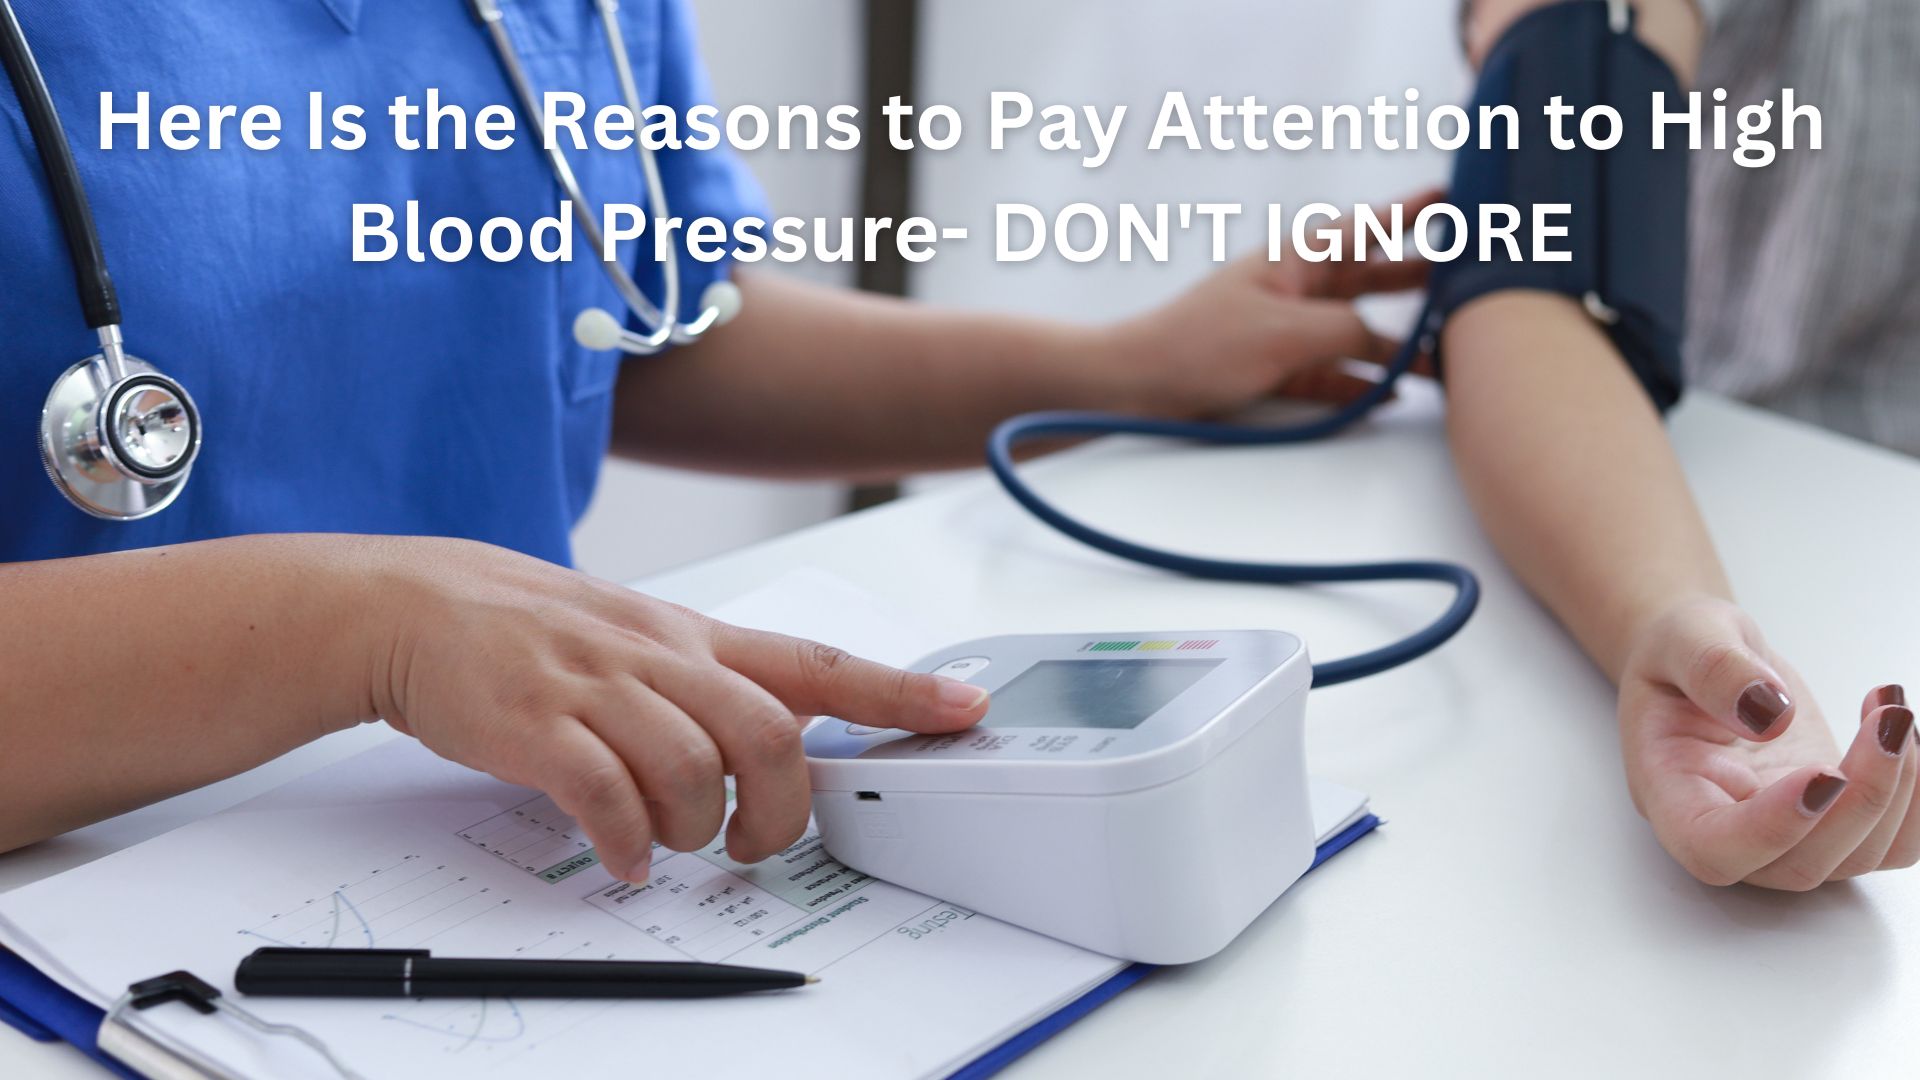 Here Is the Reasons to Pay Attention to High Blood Pressure- DON'T IGNORE